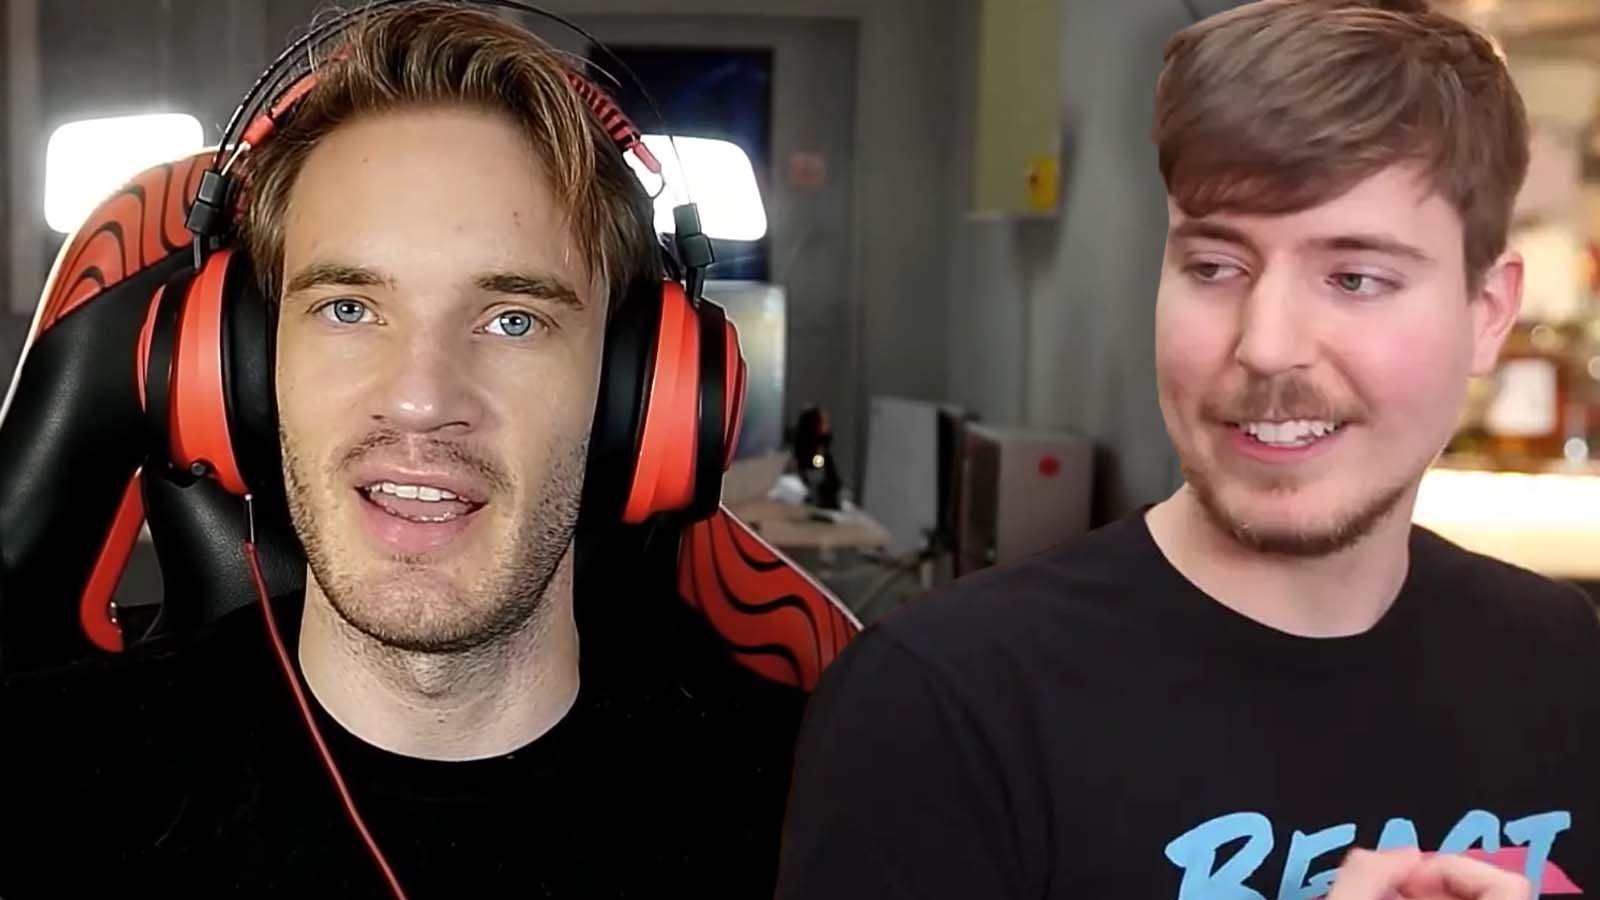 MrBeast reveals the one thing he loves about YouTube rival PewDiePie